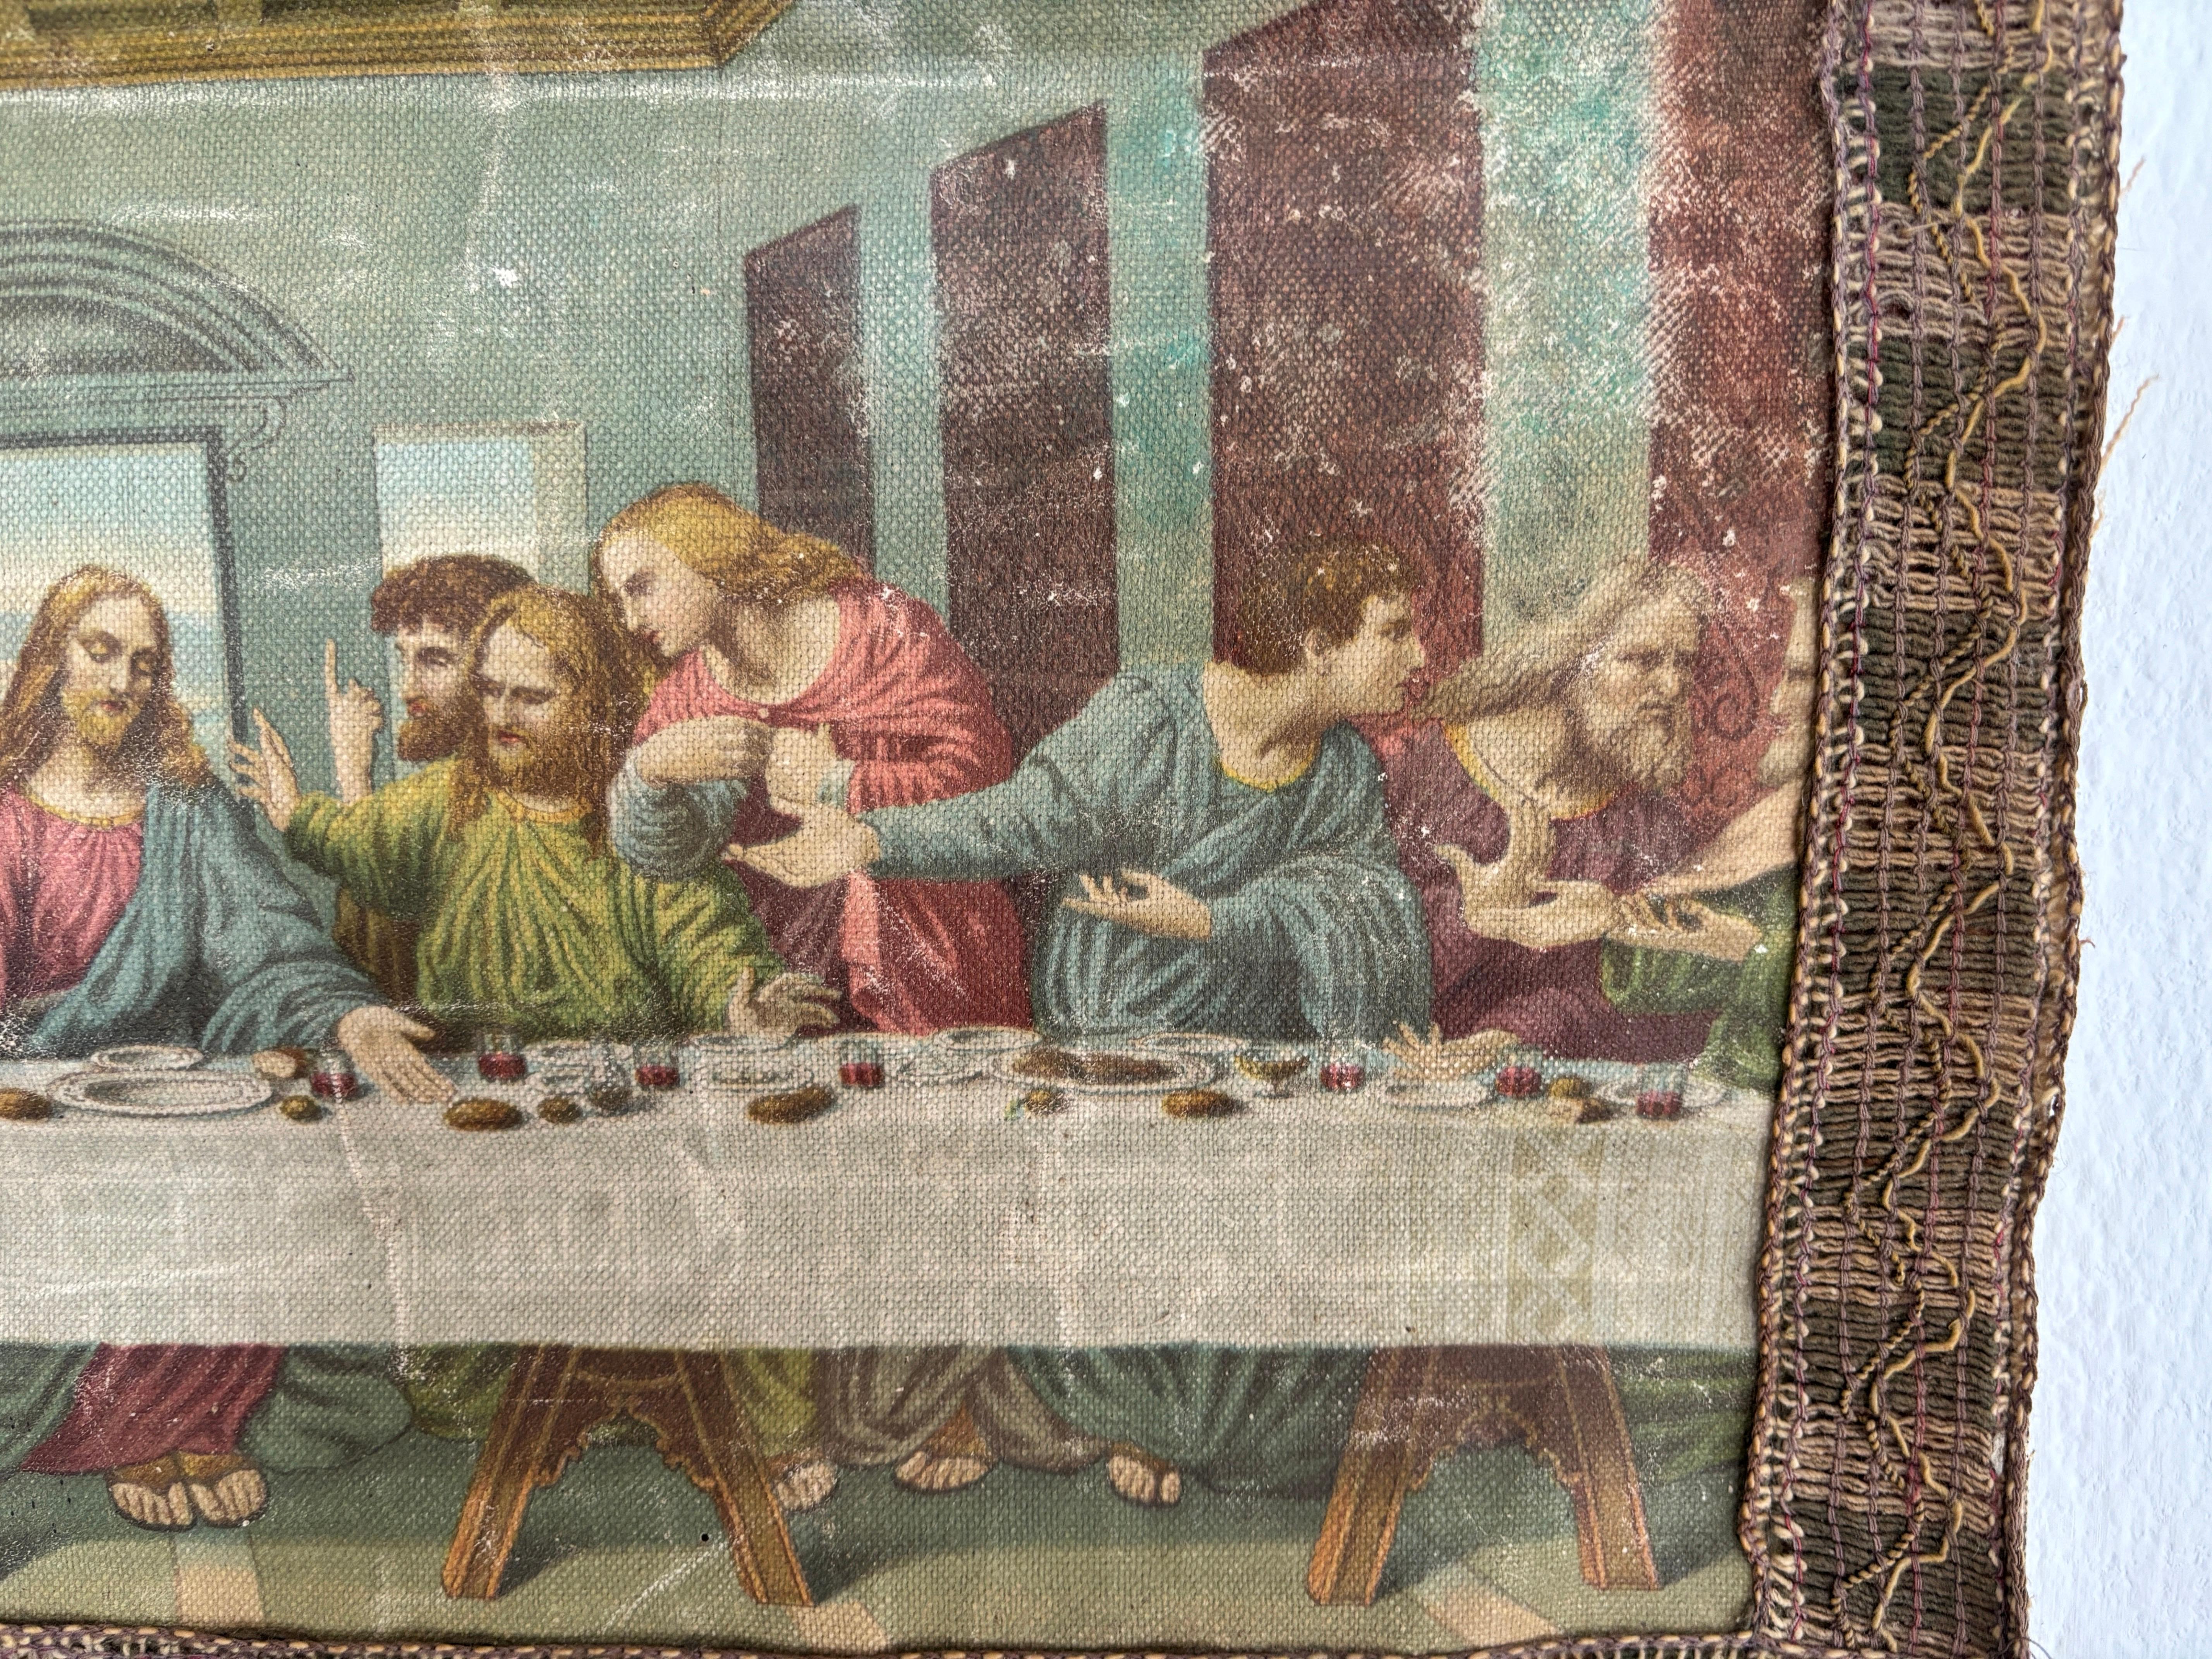 19th Century Italian Religious Banner The Last supper  Oliograph Tapestry Small 4